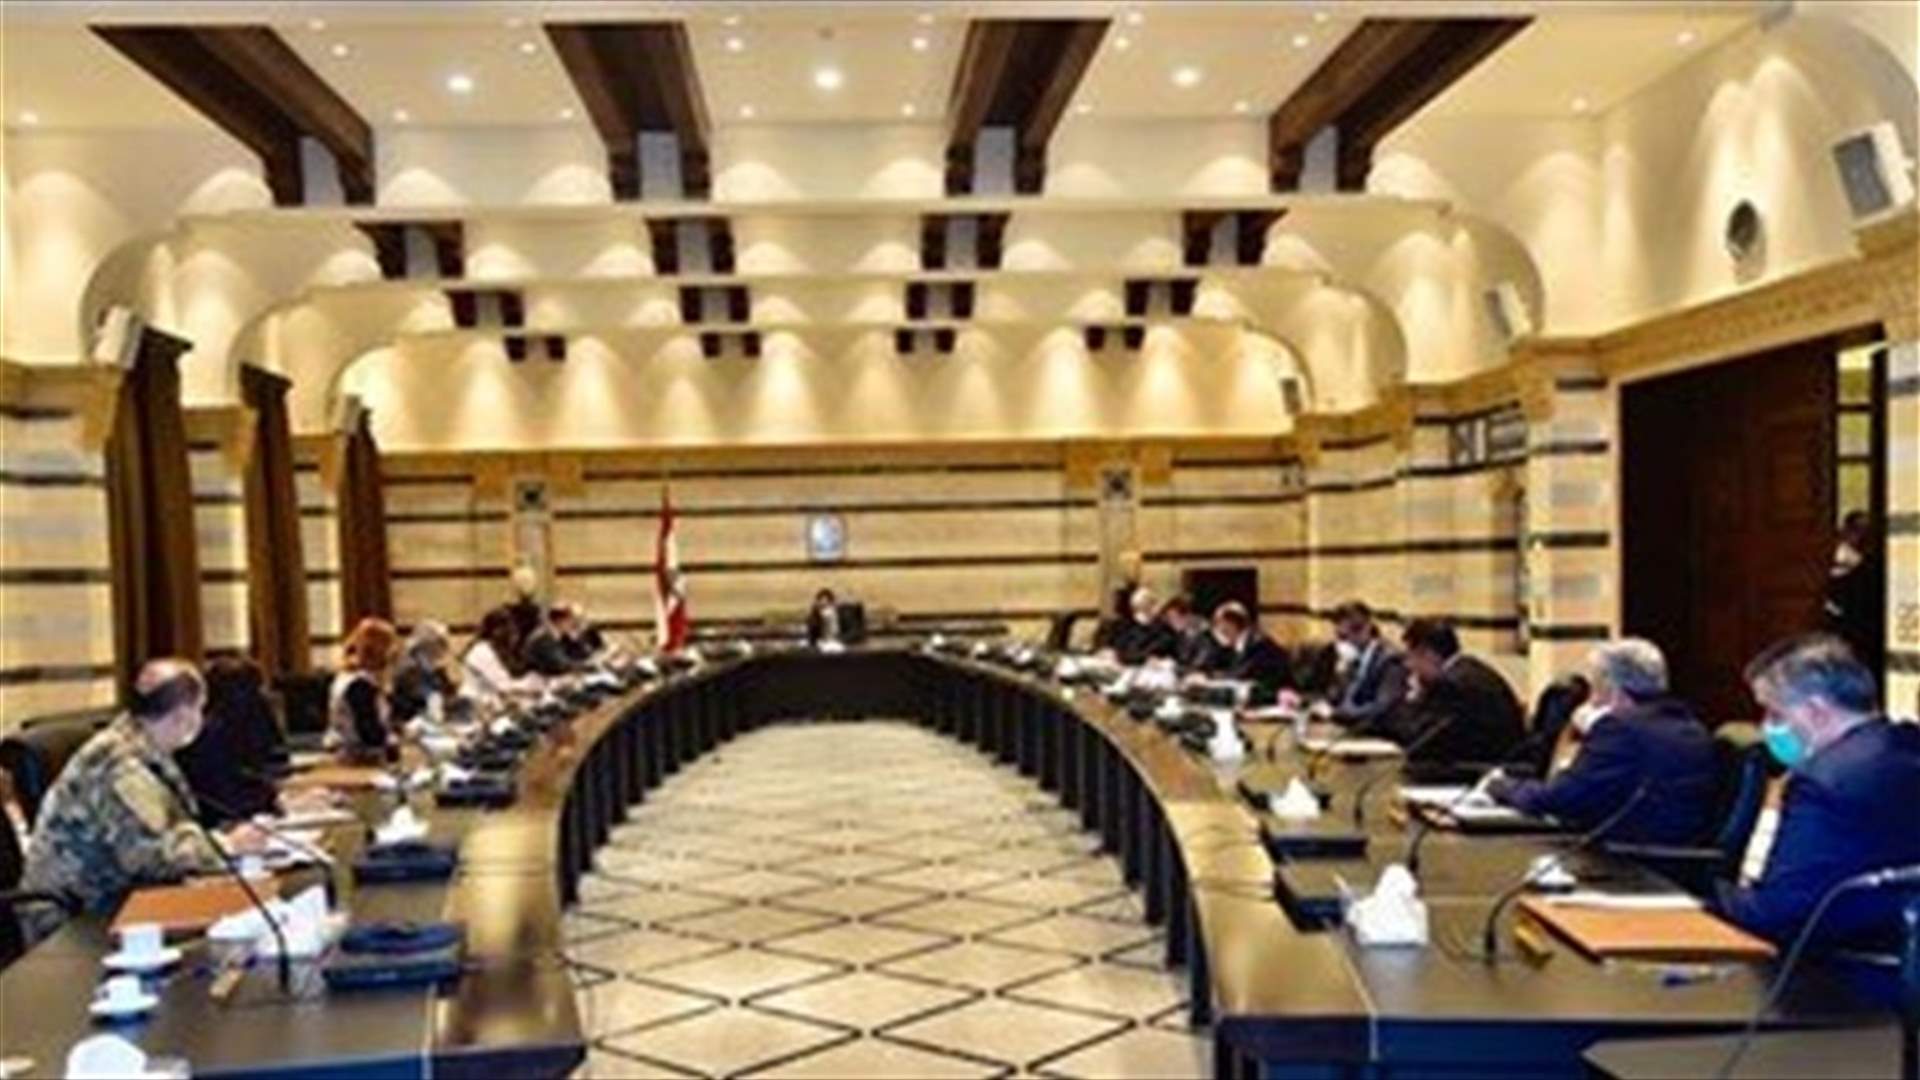 PM Diab chairs meeting of ministerial committee tasked with fighting corruption